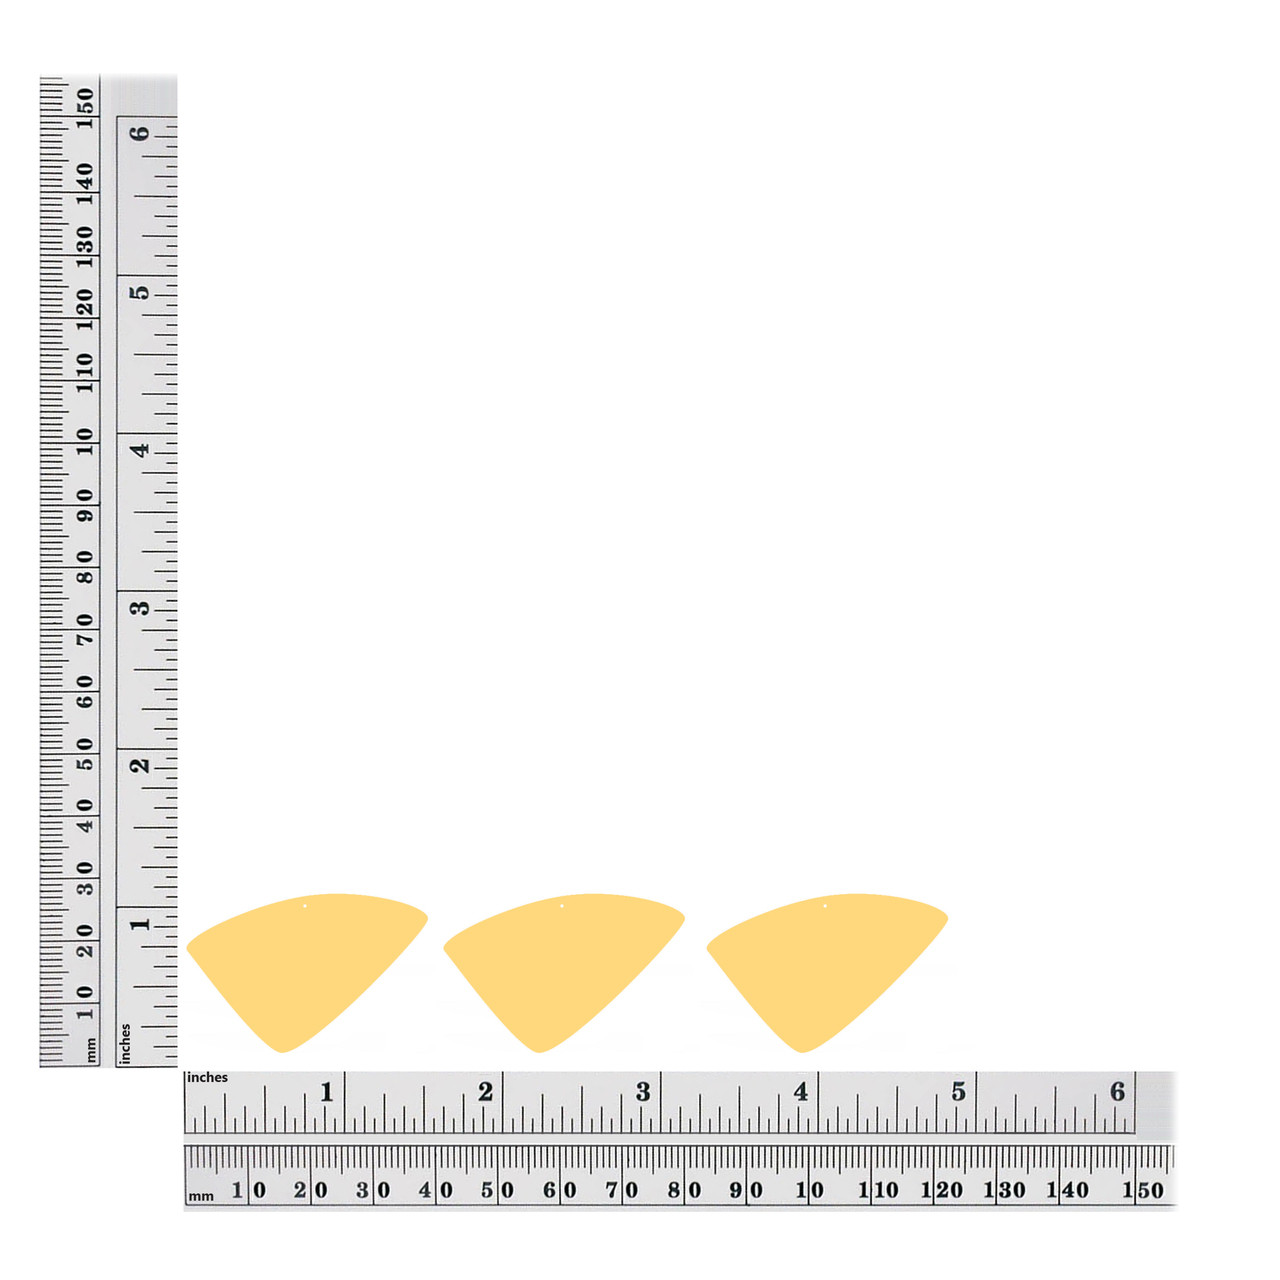 1.5 inch fishscale sequin size chart